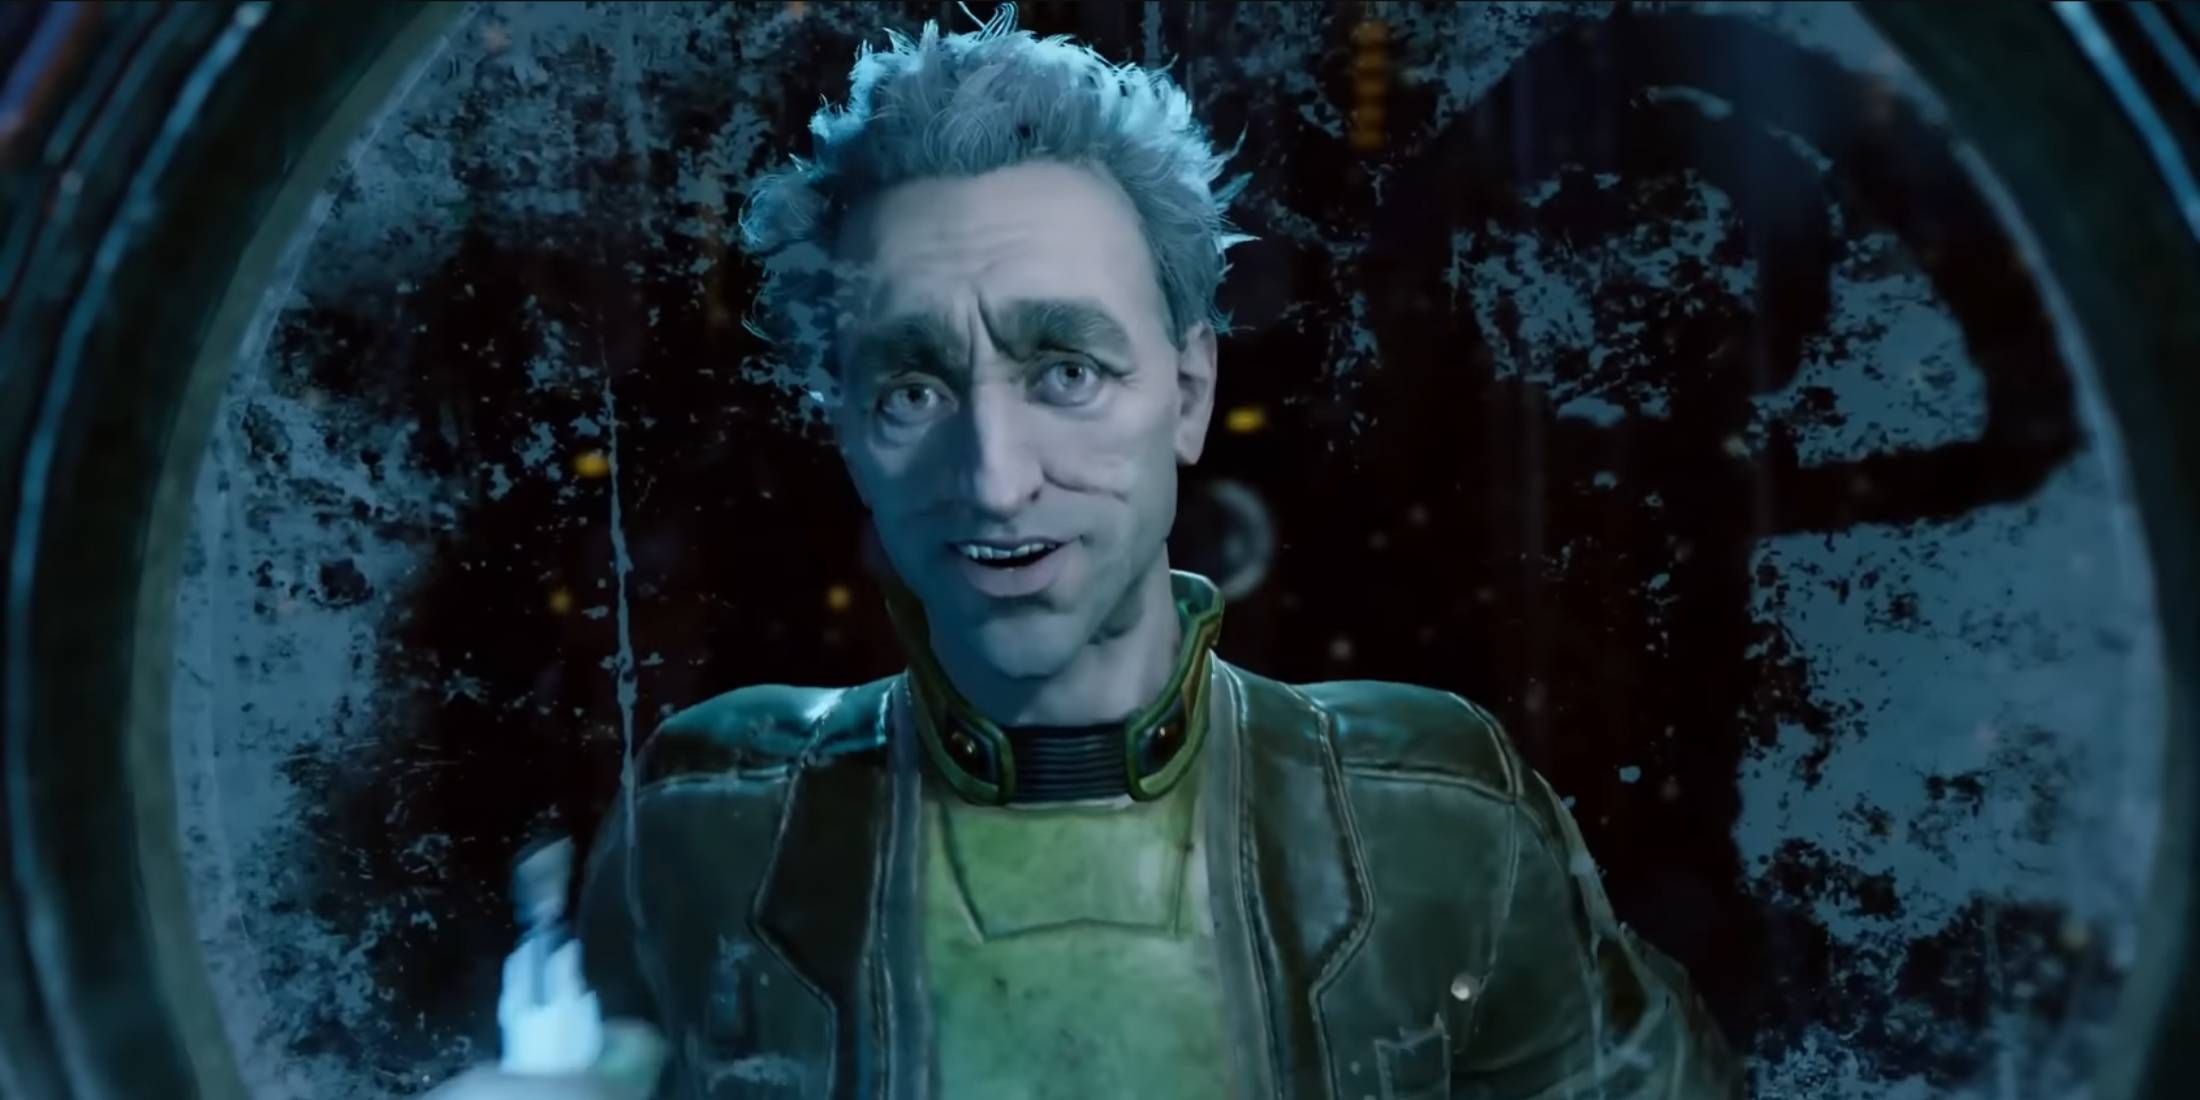 Phineas from a trailer for The Outer Worlds